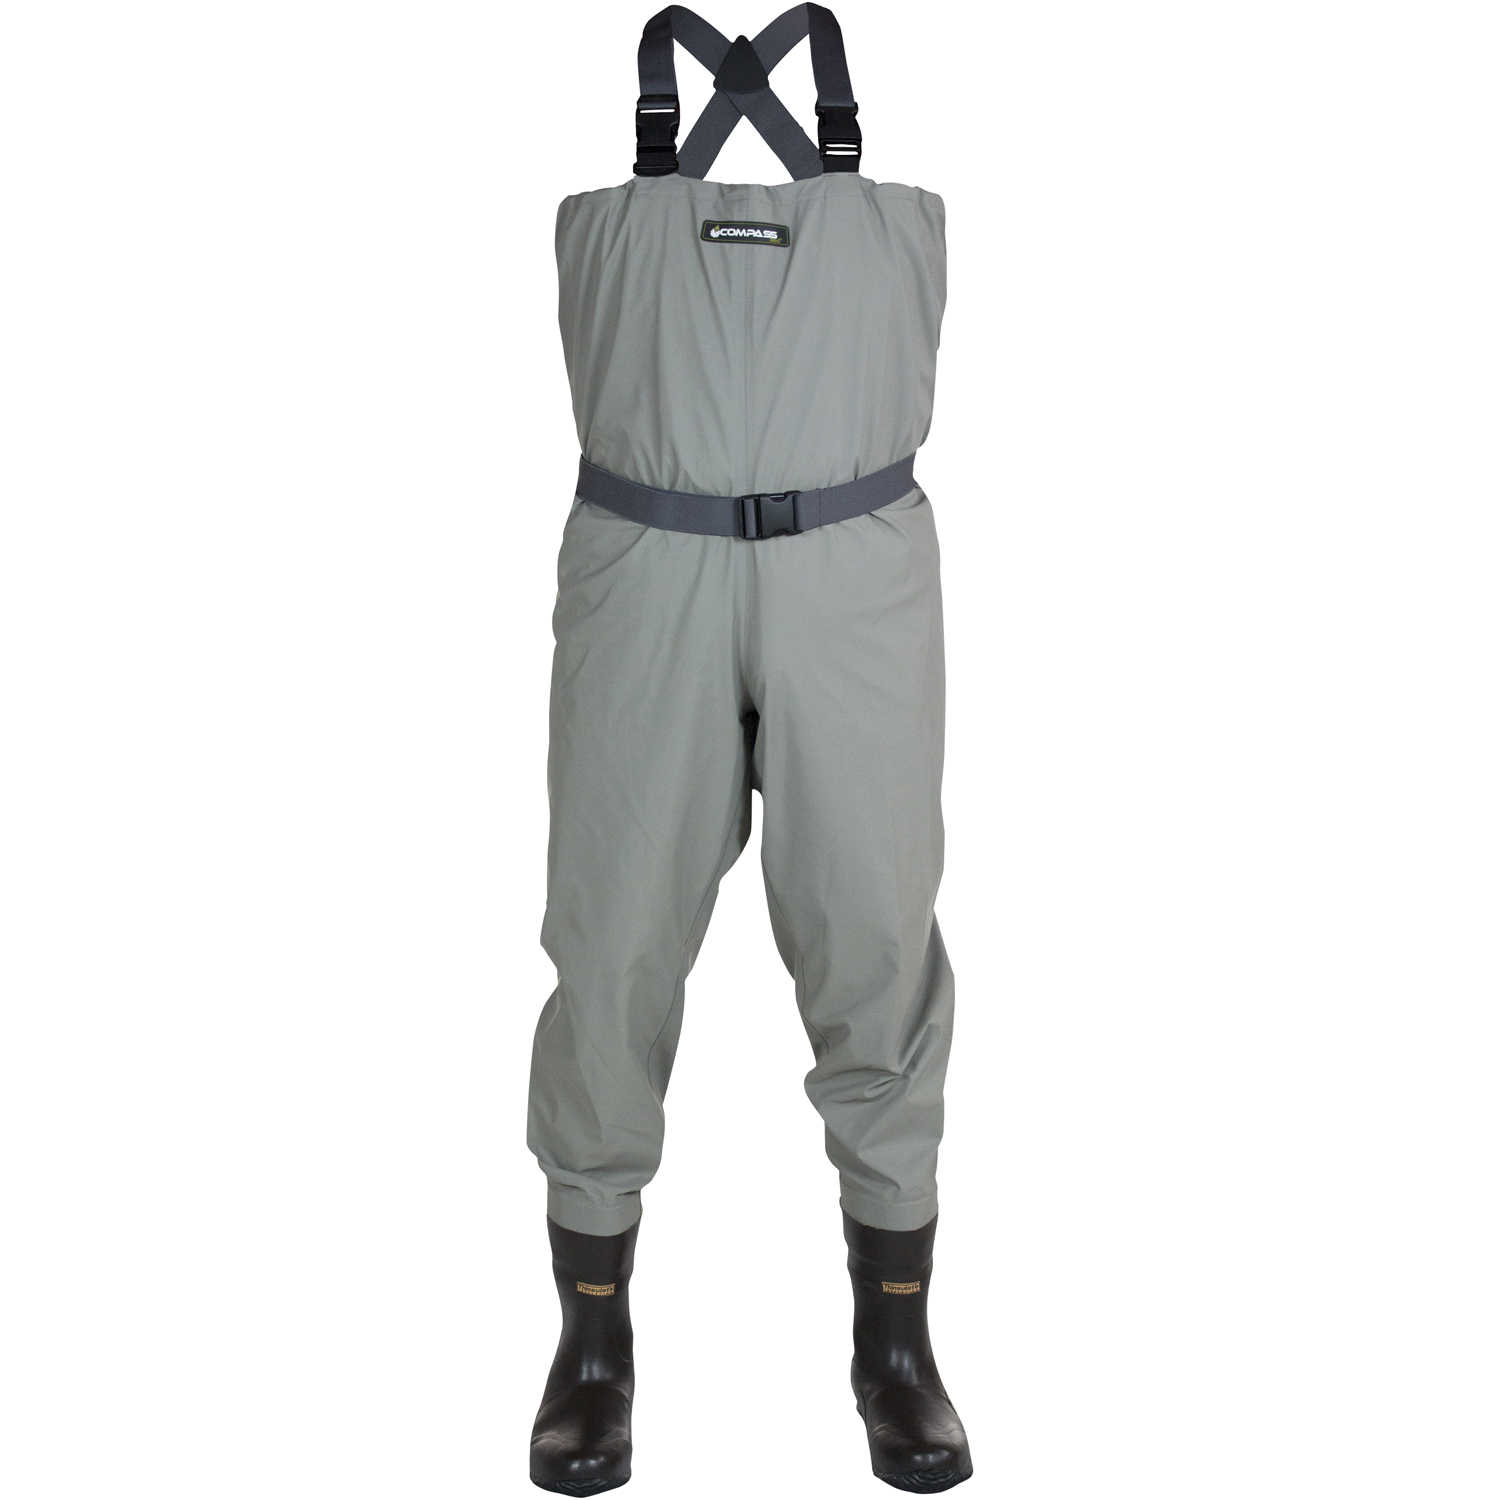 Compass 360 Stillwater Breathable Cleated Sole Chest Waders, Size 11 | eBay